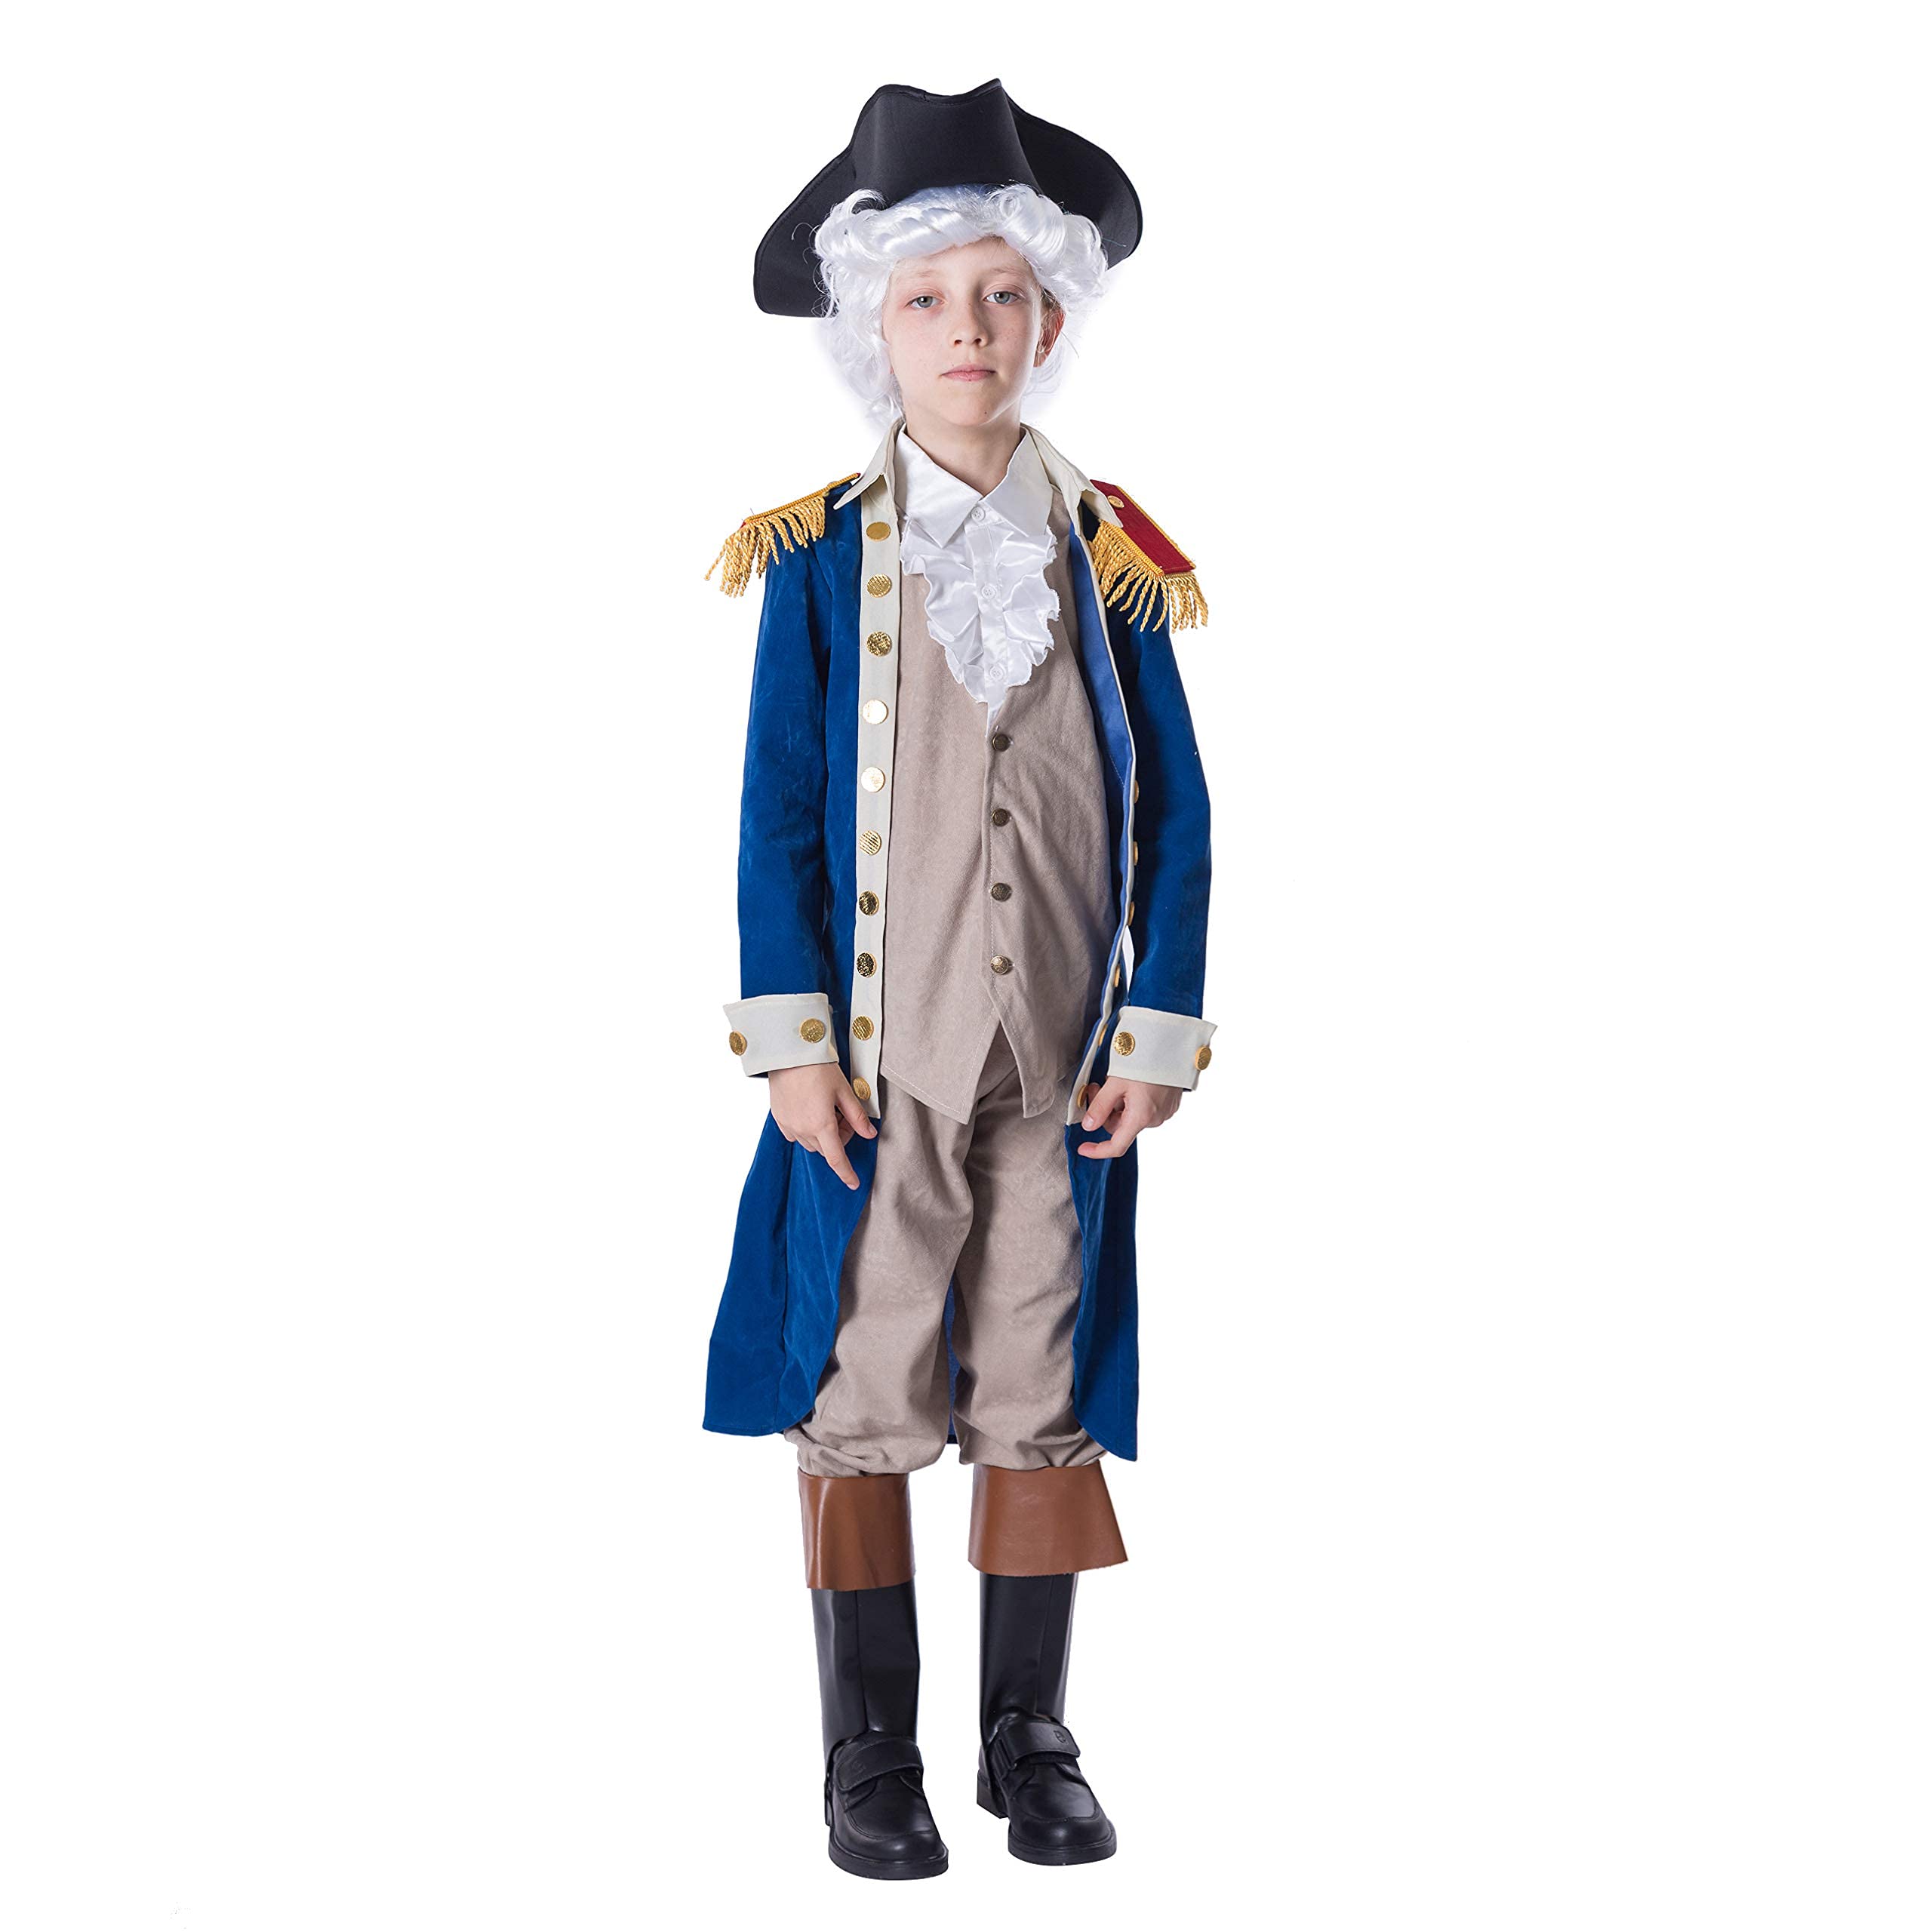 Spooktacular Creations George Washington Colonial Boys Costume Set with Wig and Hat for Halloween Dress Up Party